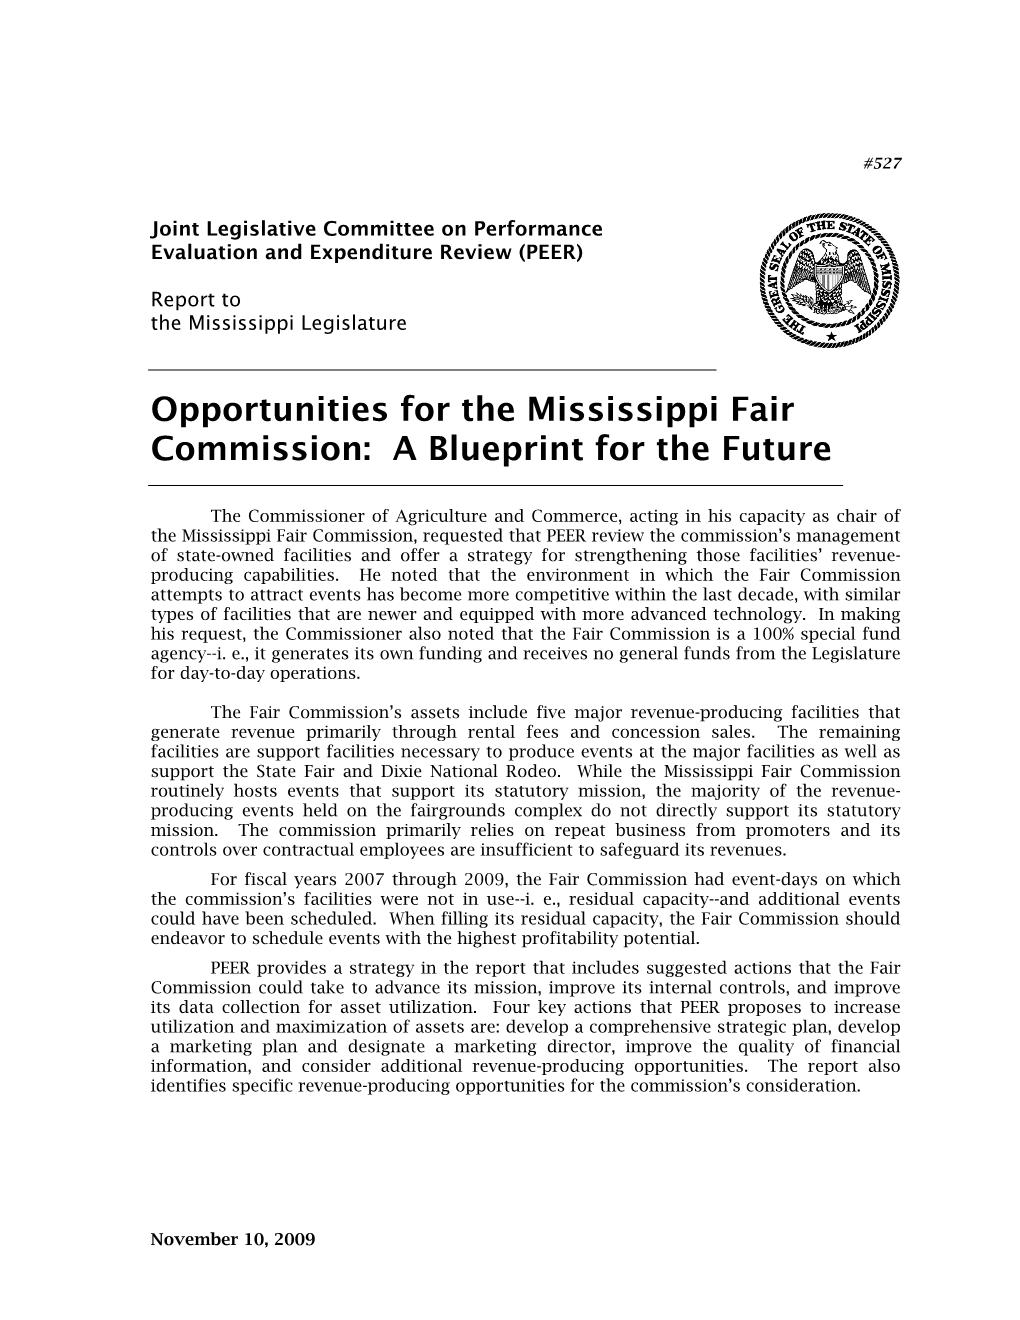 Opportunities for the Mississippi Fair Commission: a Blueprint for the Future